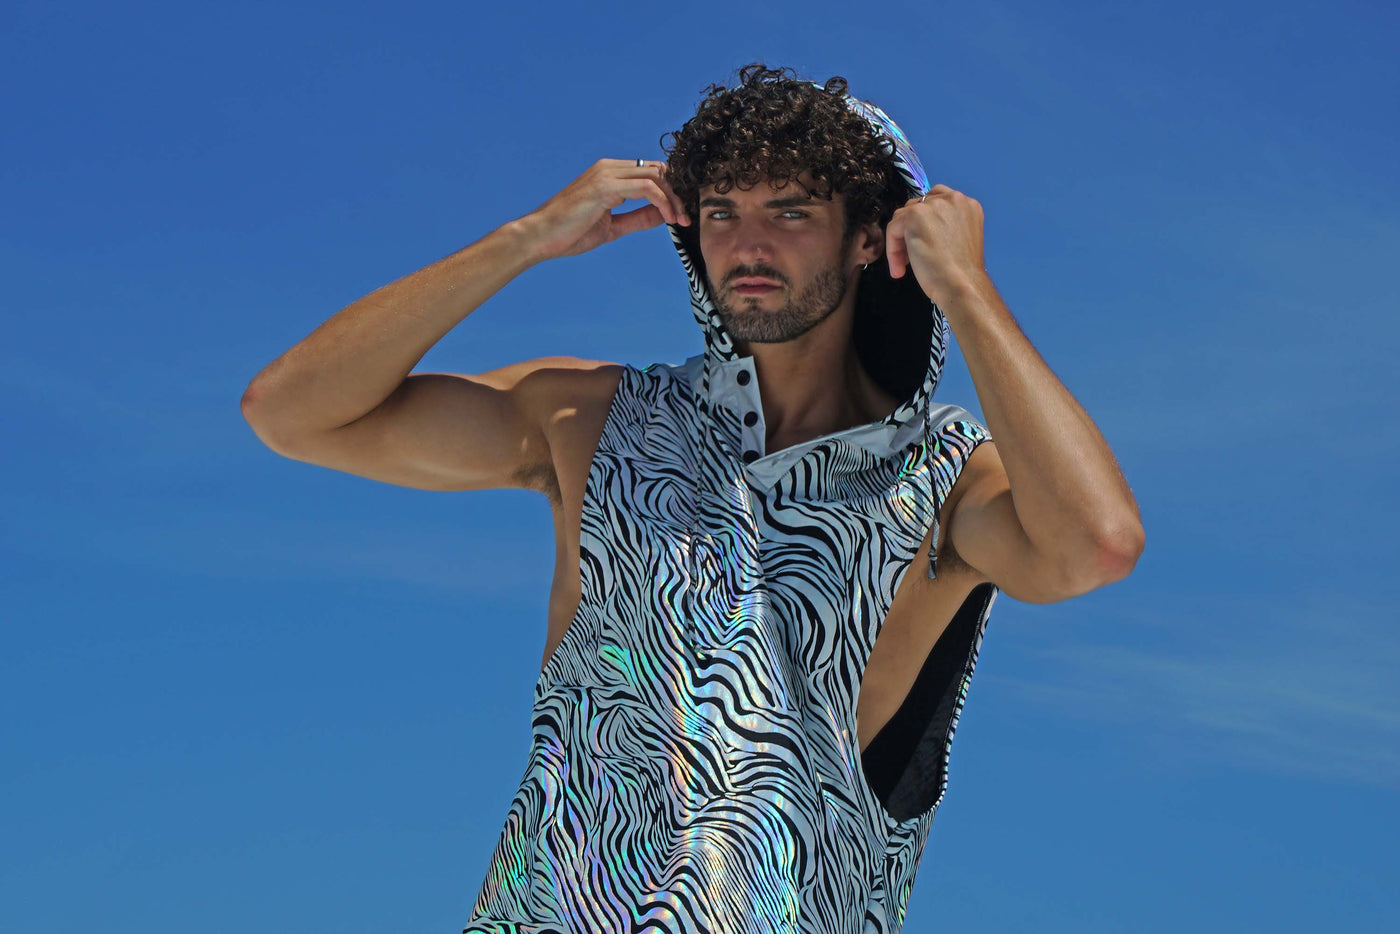 Mens Holographic Silver zebra print festival hoodie top by Love Khaos Festival Clothing Brand